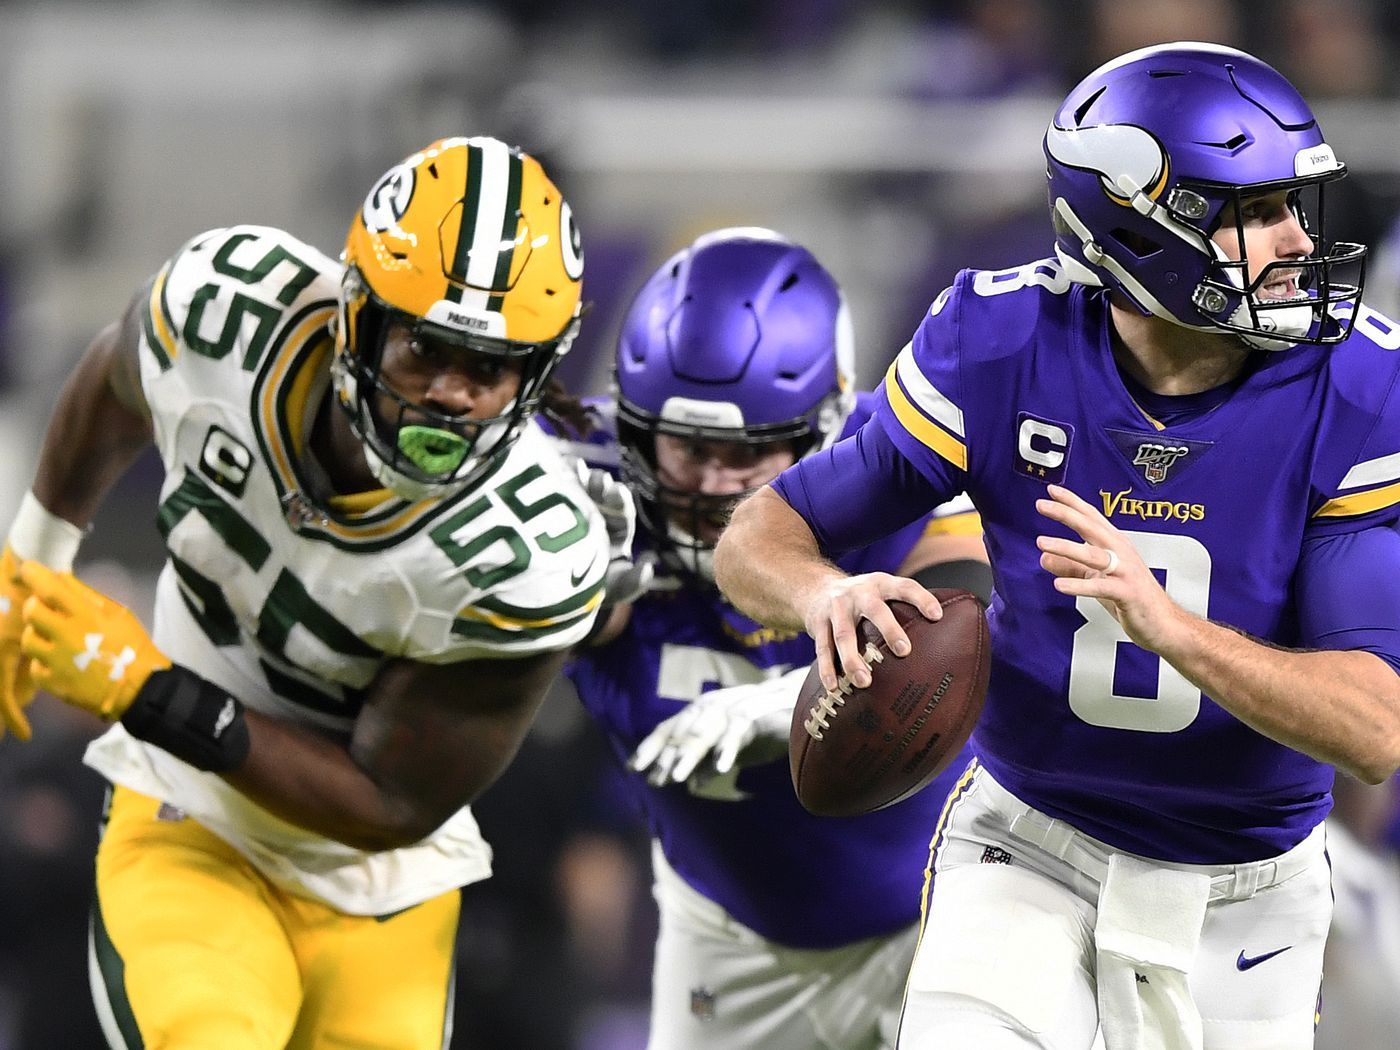 Packers News and Links: Za'Darius Smith took over the game as Green Bay wins the NFC North Packing Company